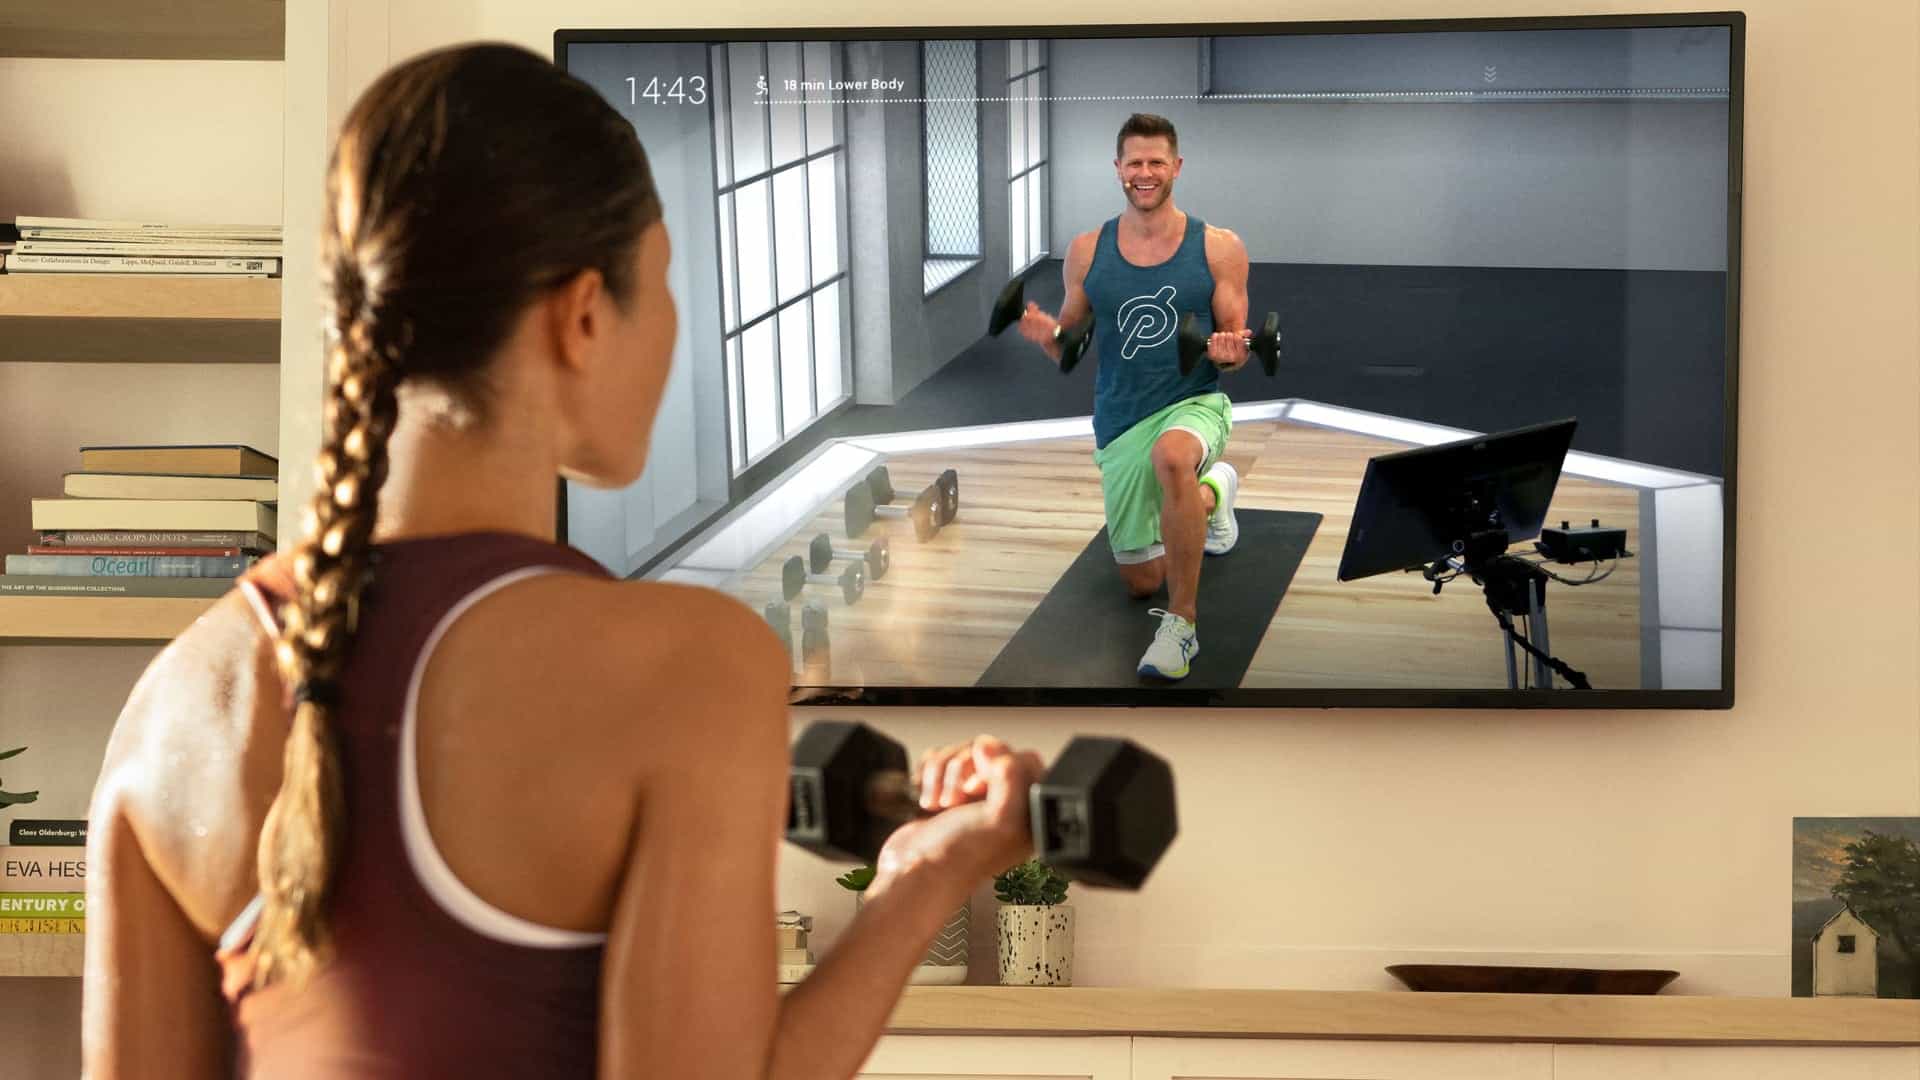 Woman working out with dumbells using the Peloton app on TV